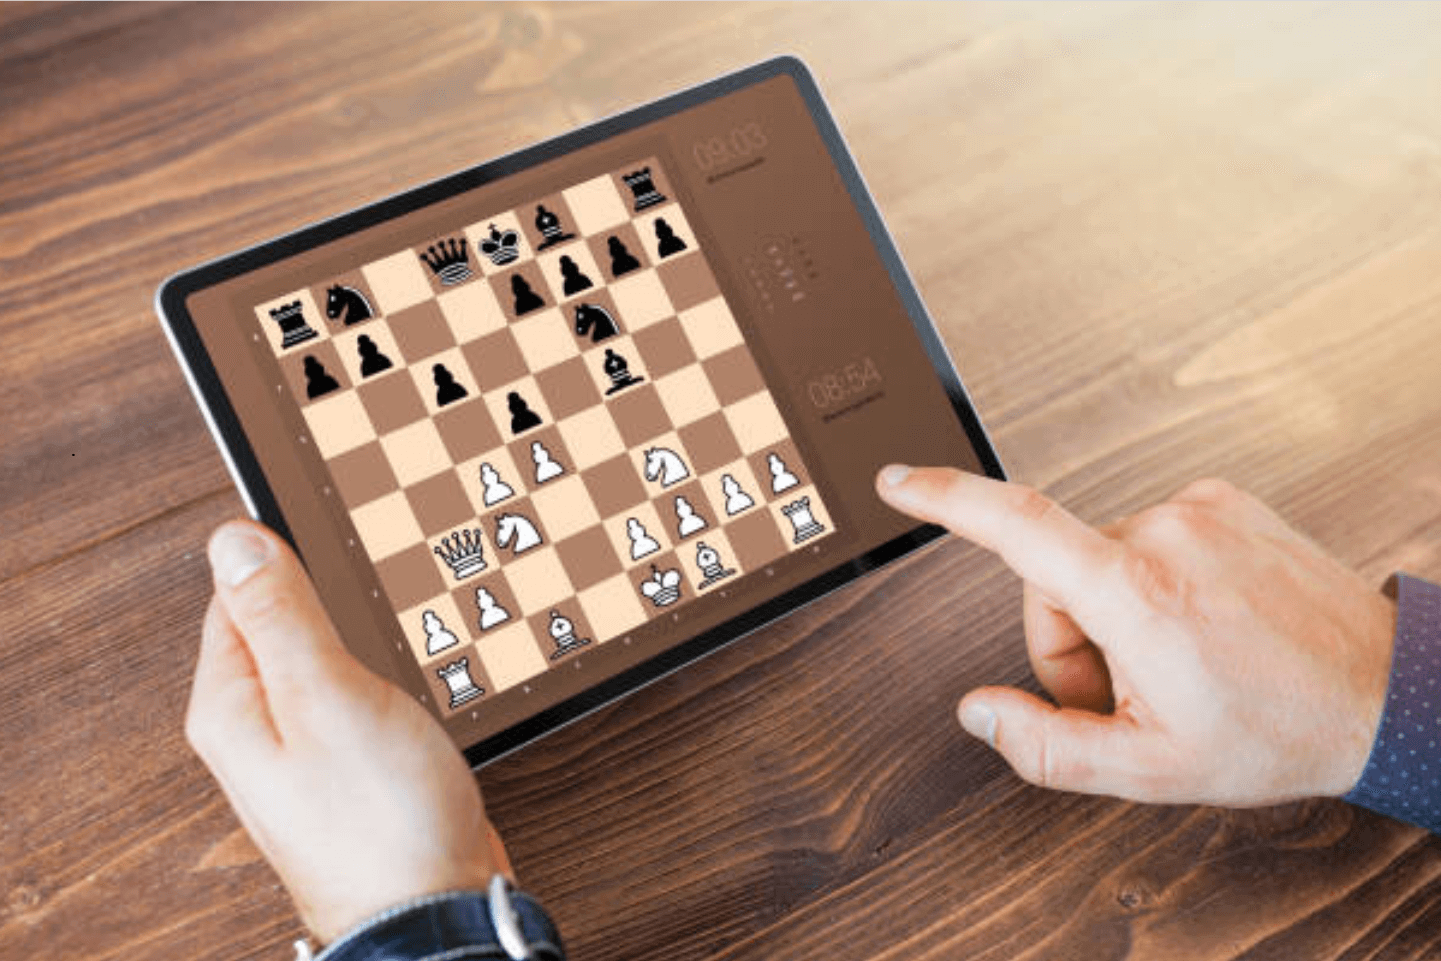 Play chess online against a computer opponent. Set the level from easy to  master, and get hints on how to win!